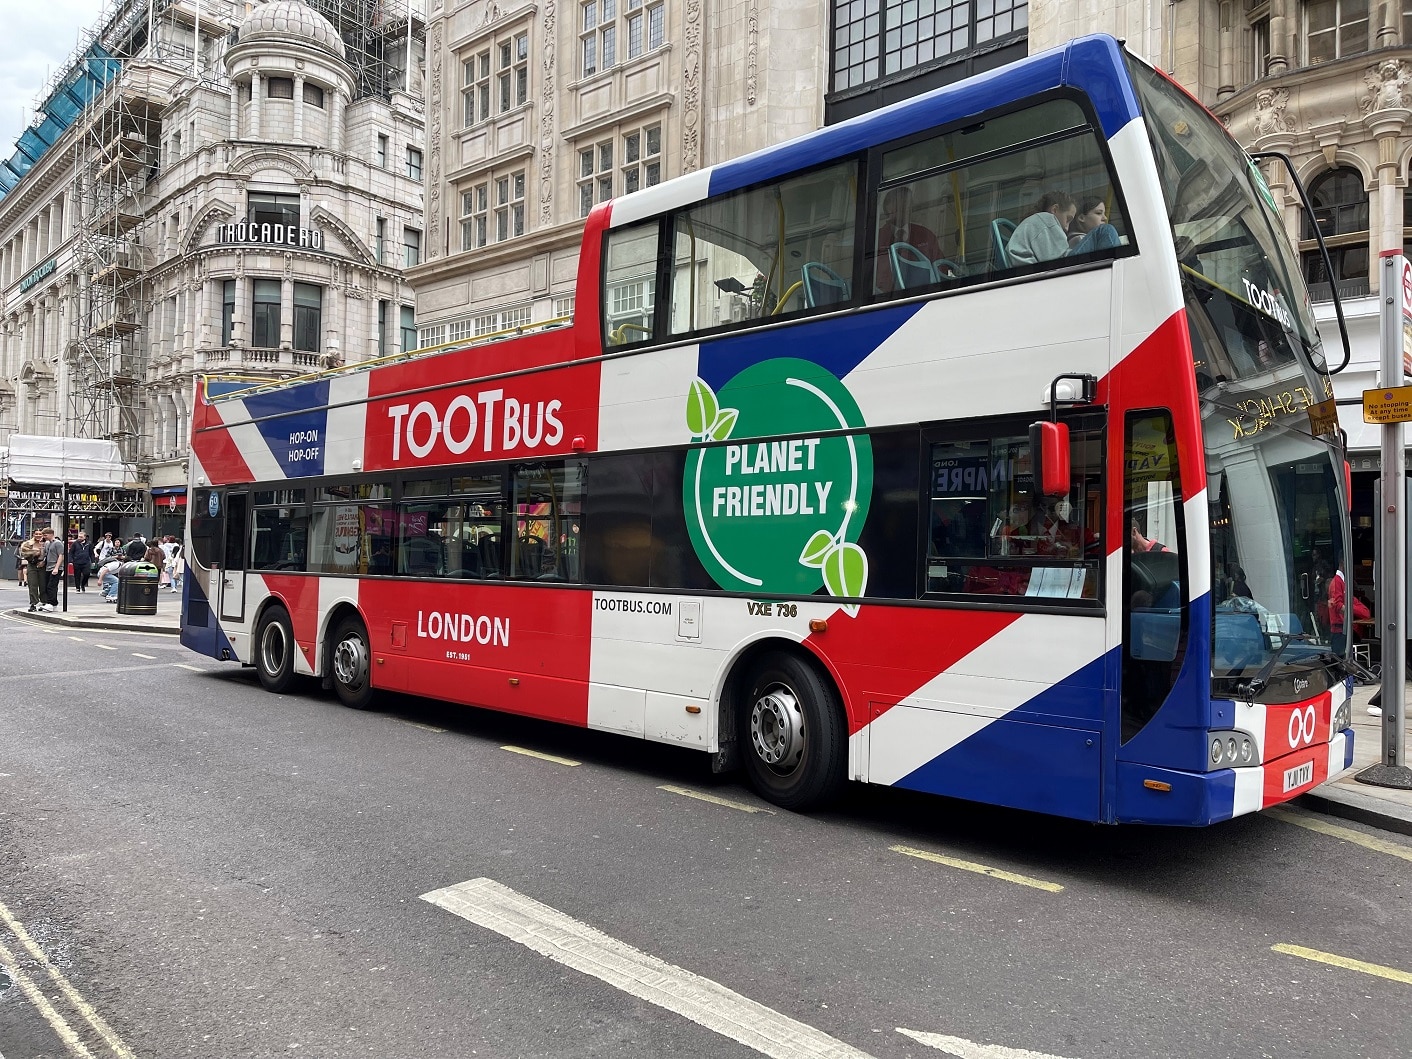 Tootbus London moves away from fossil fuels